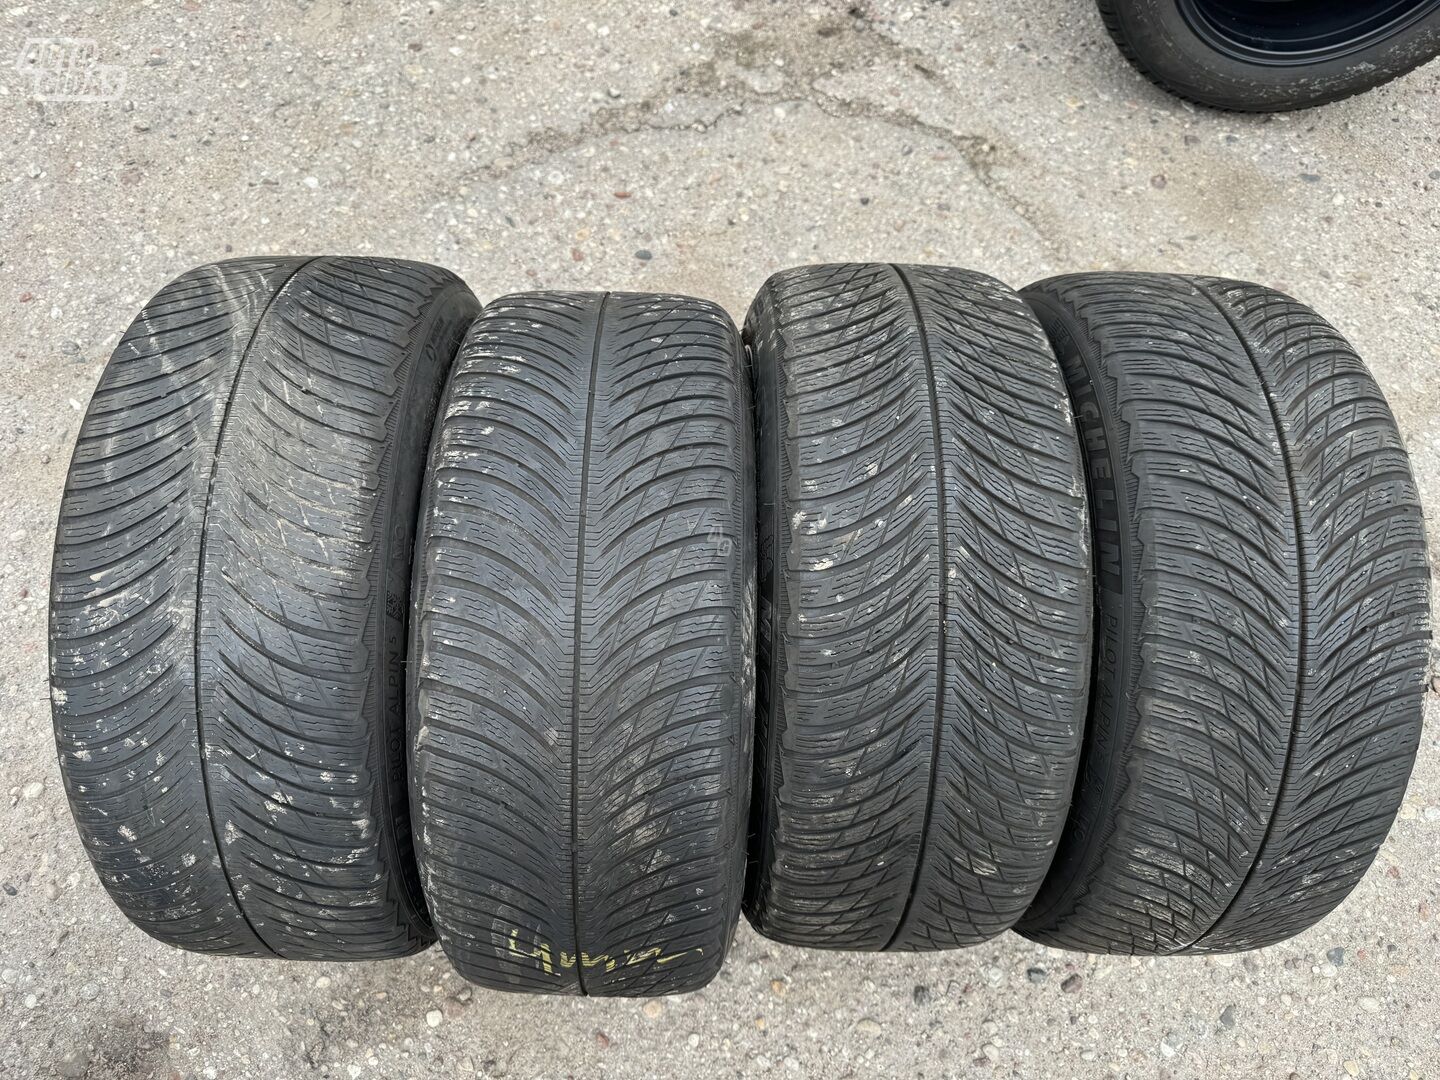 Michelin Siunciam, 4-6mm 2019 R19 universal tyres passanger car